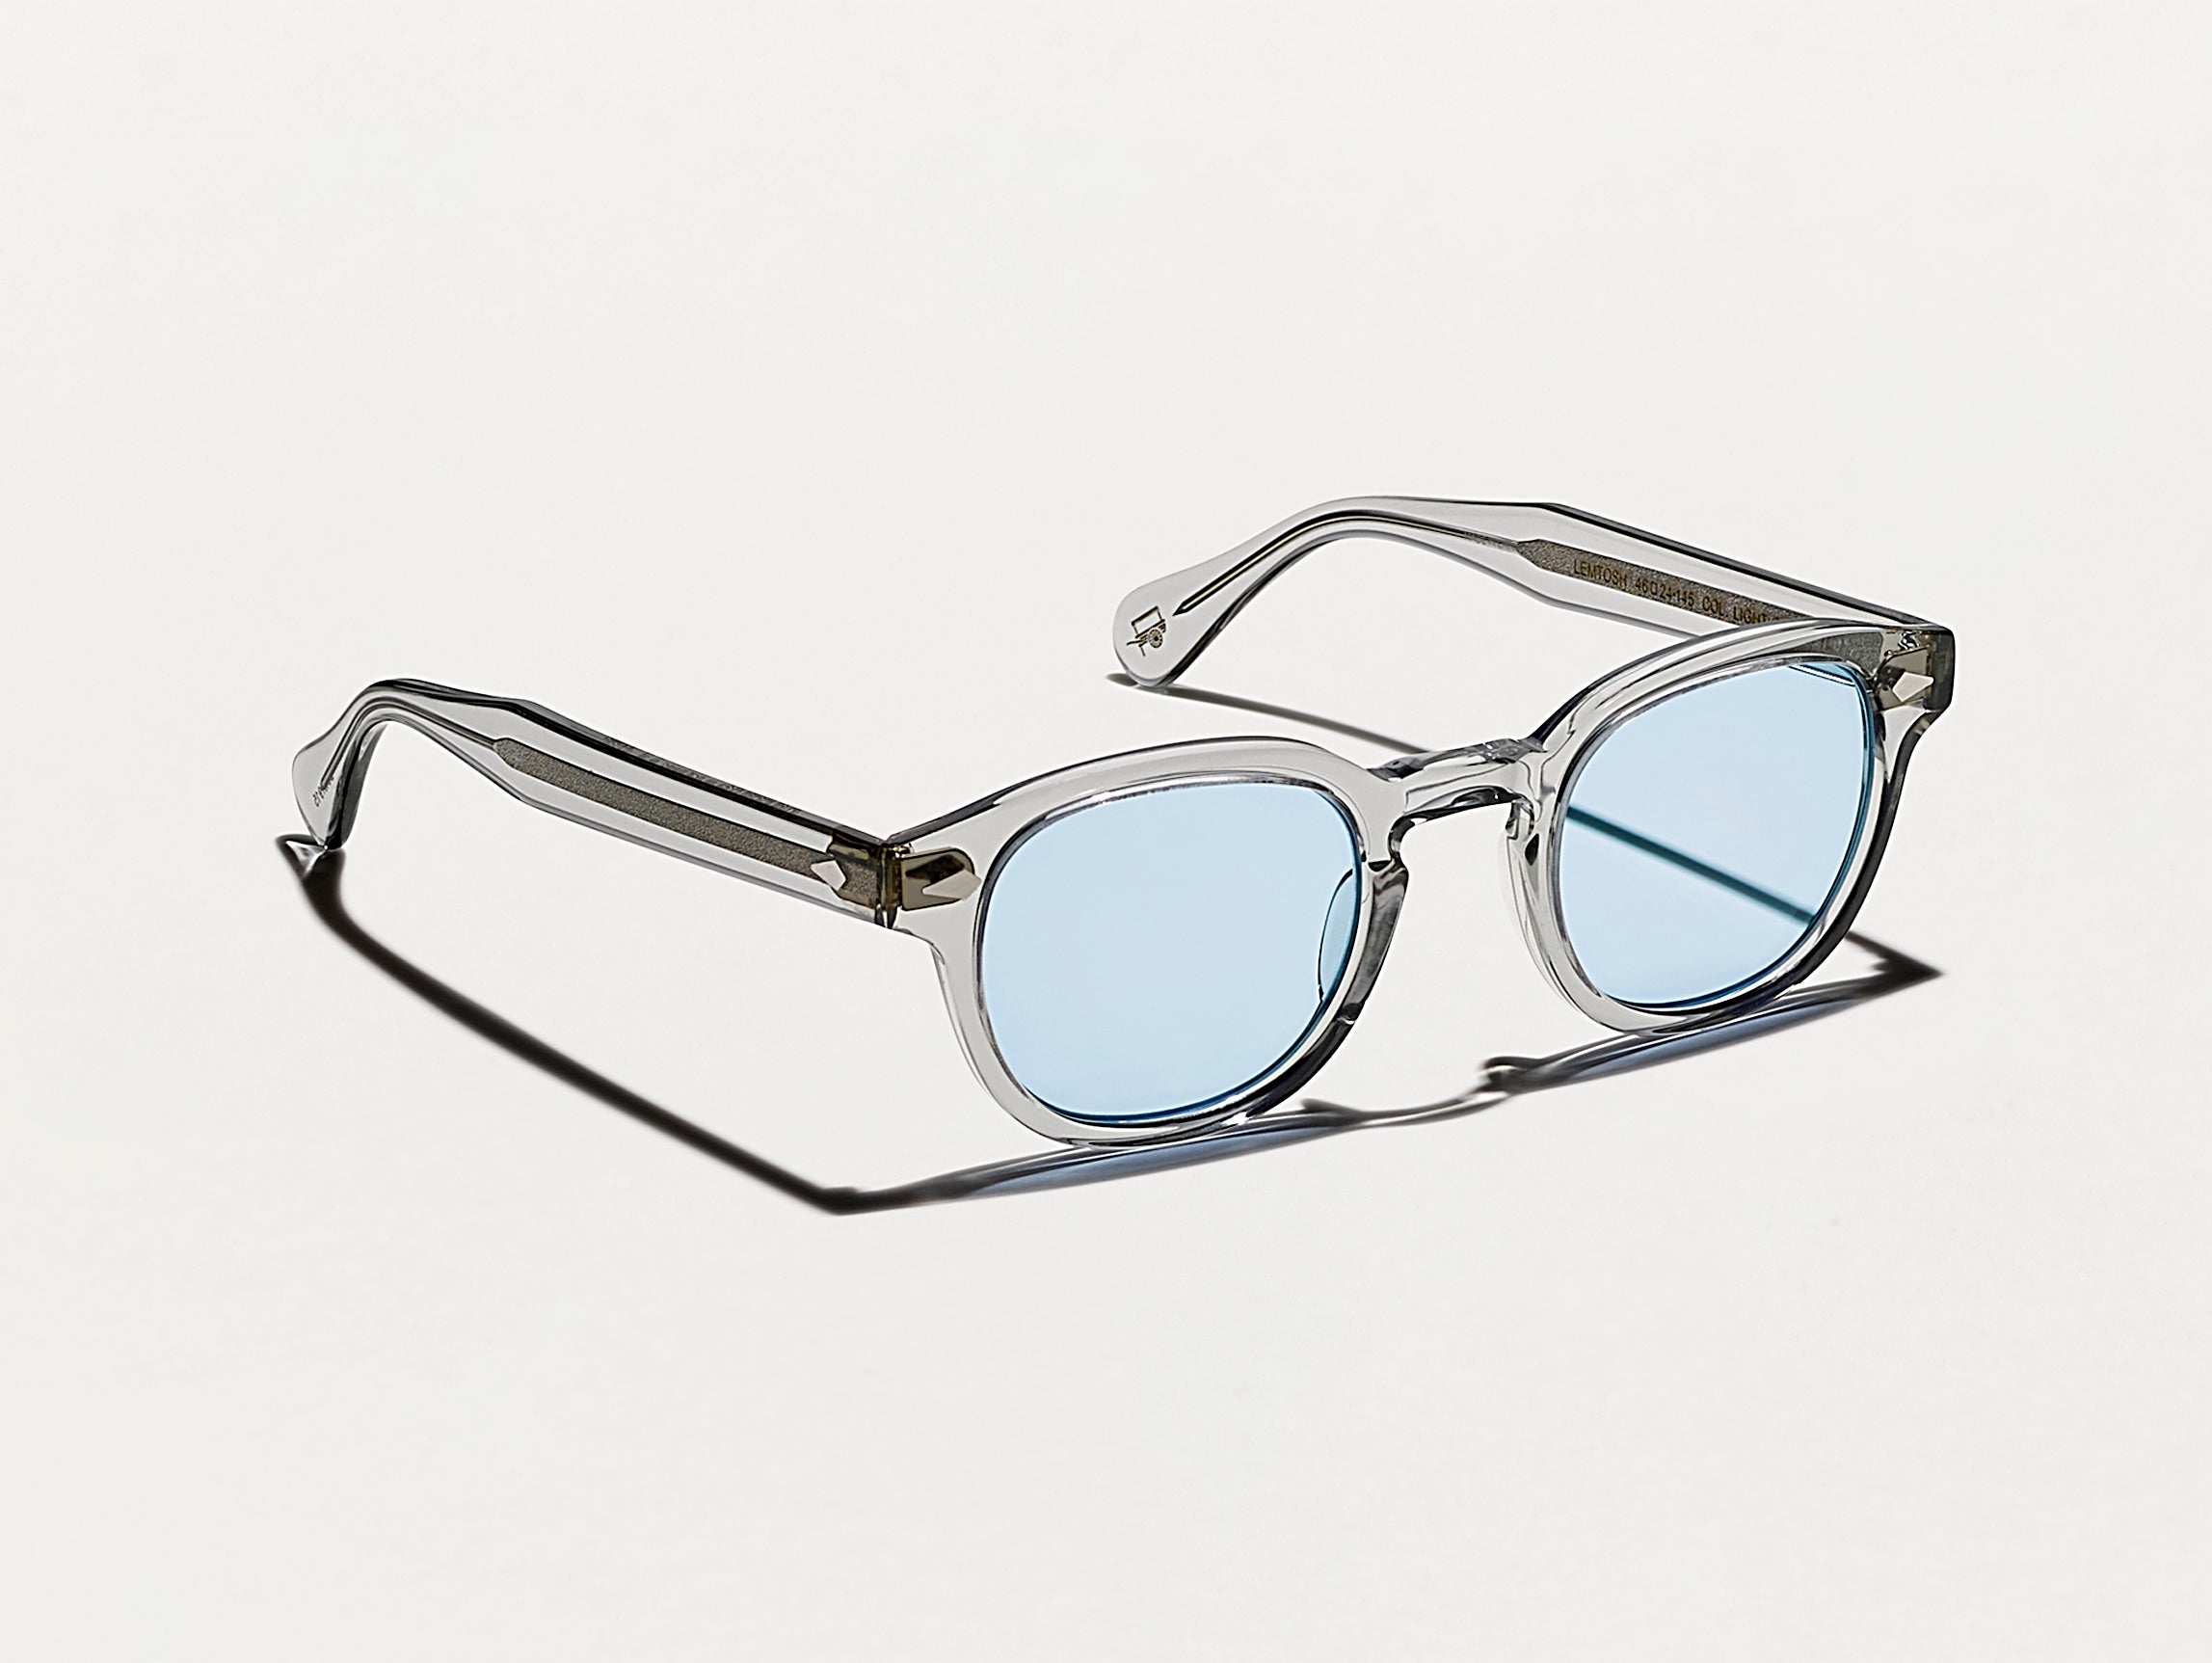 The LEMTOSH Light Grey with Bel Air Blue Tinted Lenses